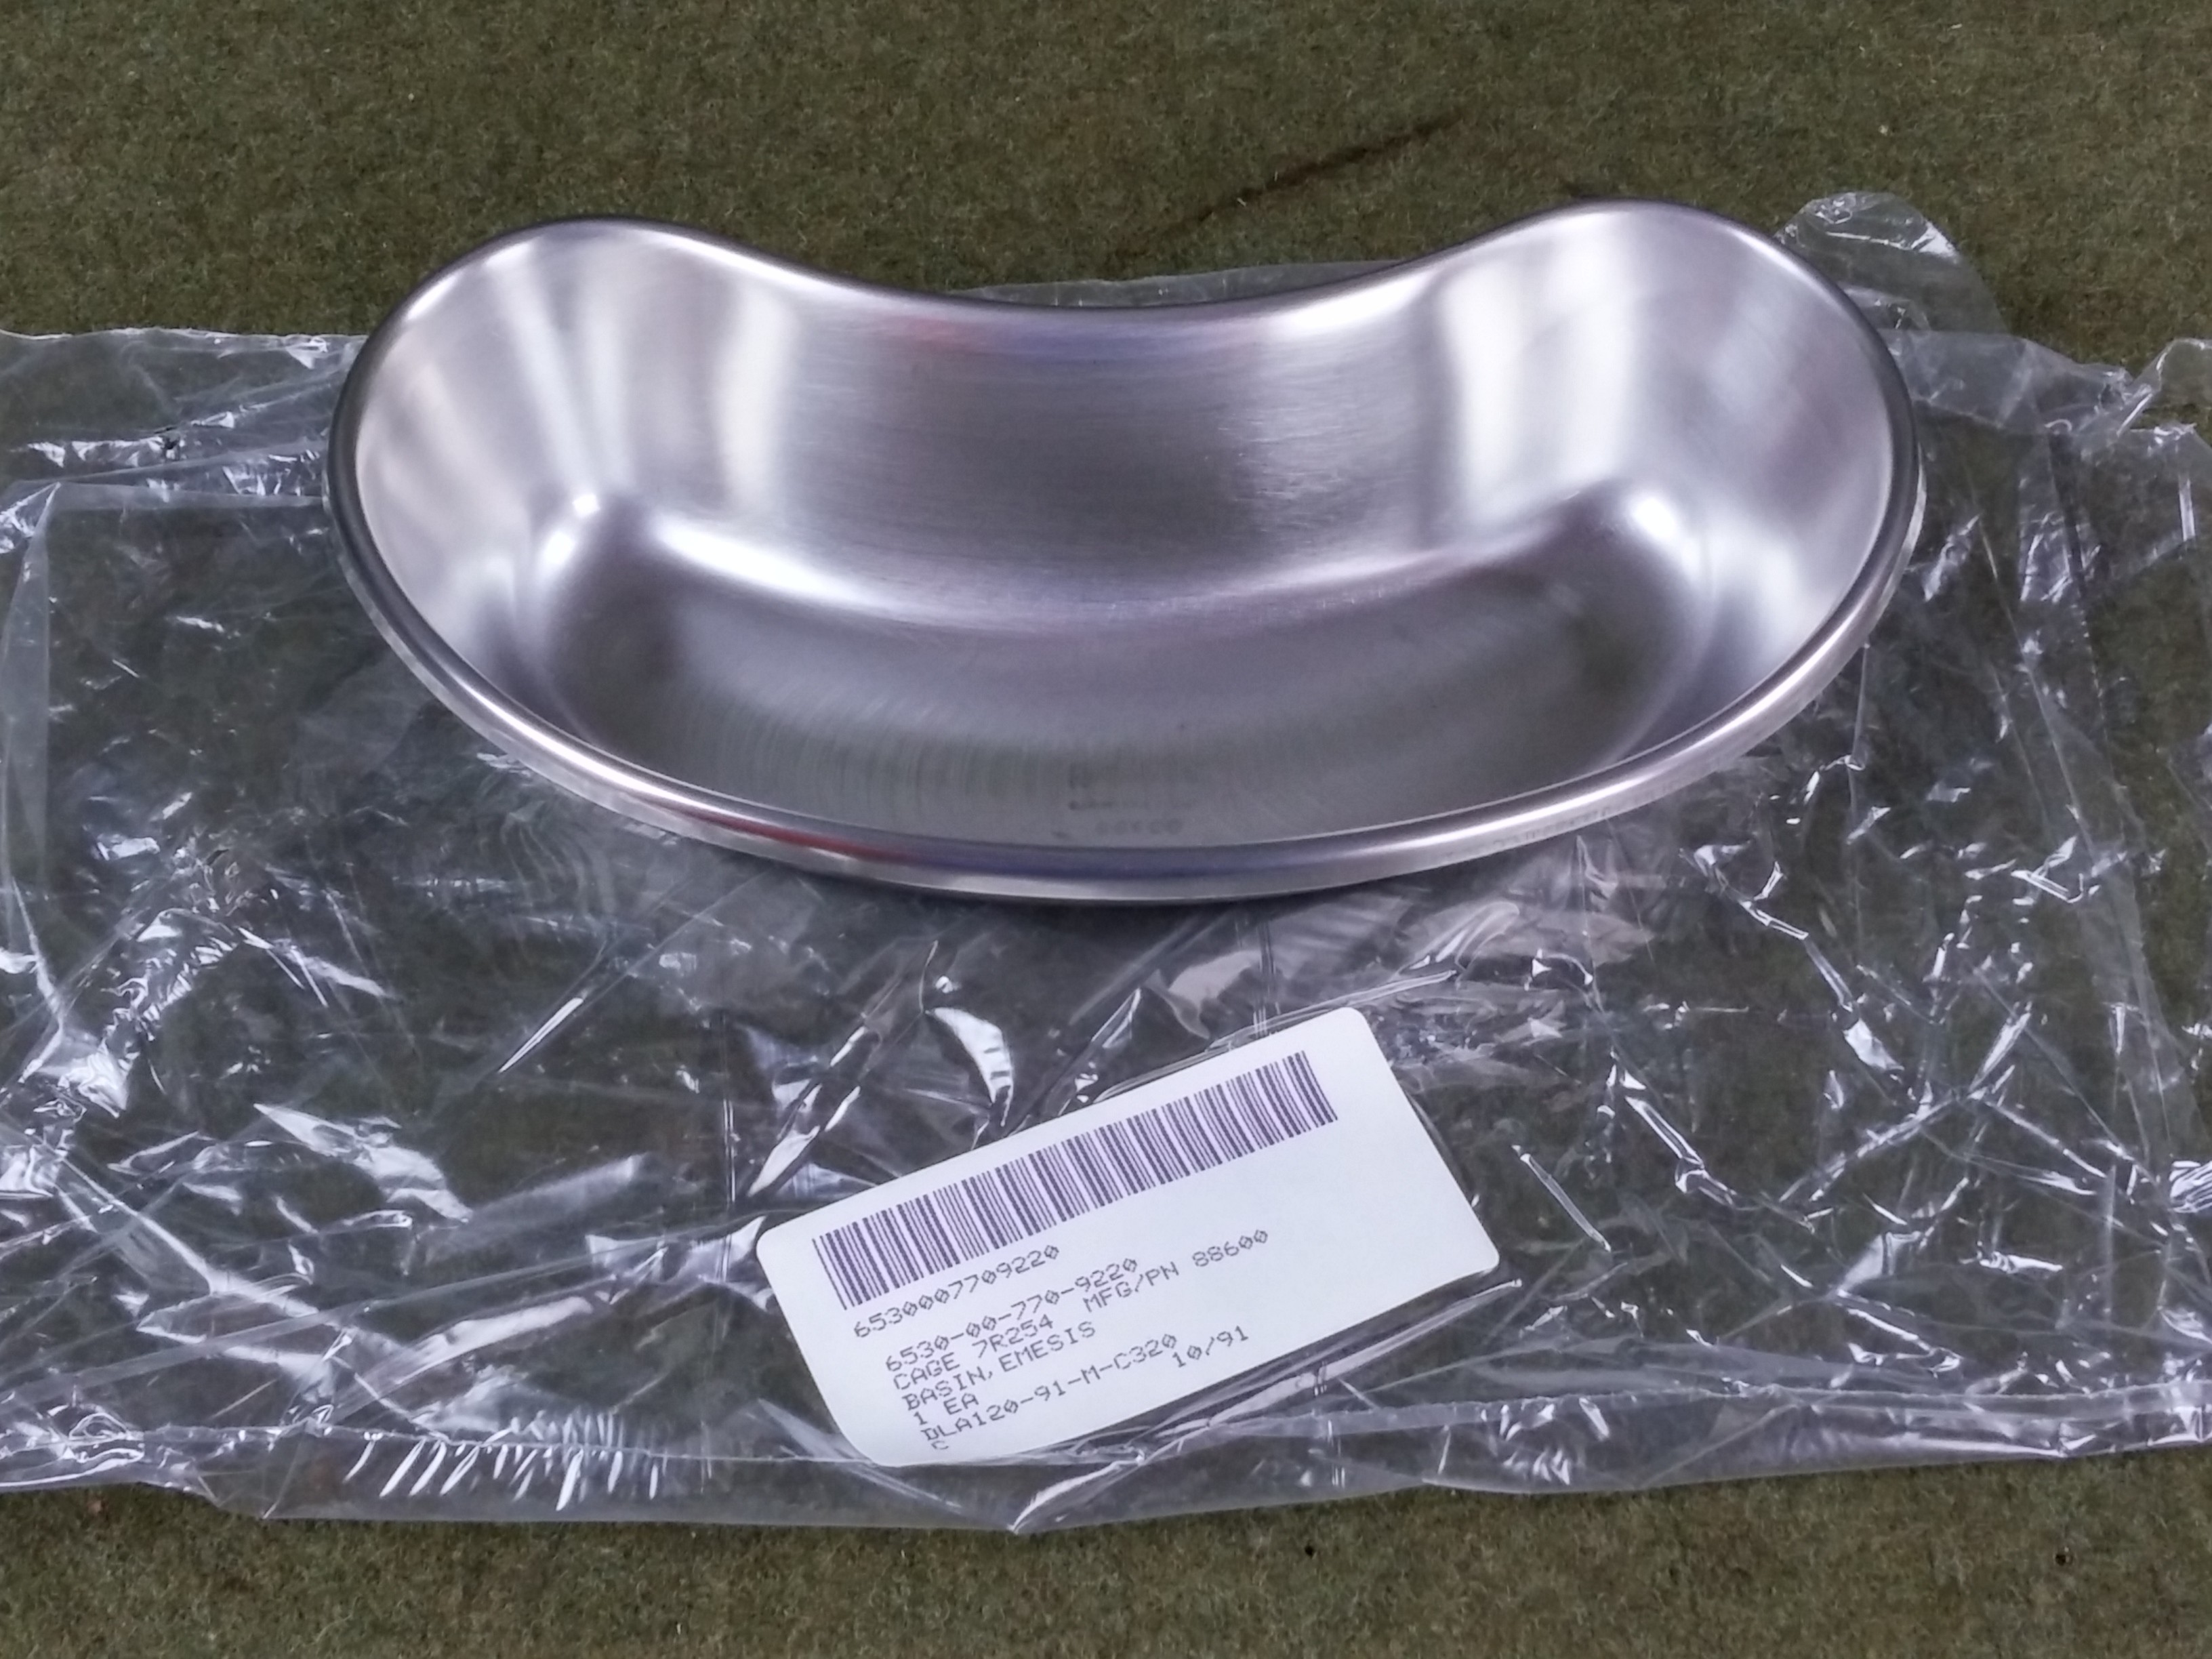  NEW Old Stock Vollrath 88600 800cc Stainless Steel Emesis / Kidney Basin